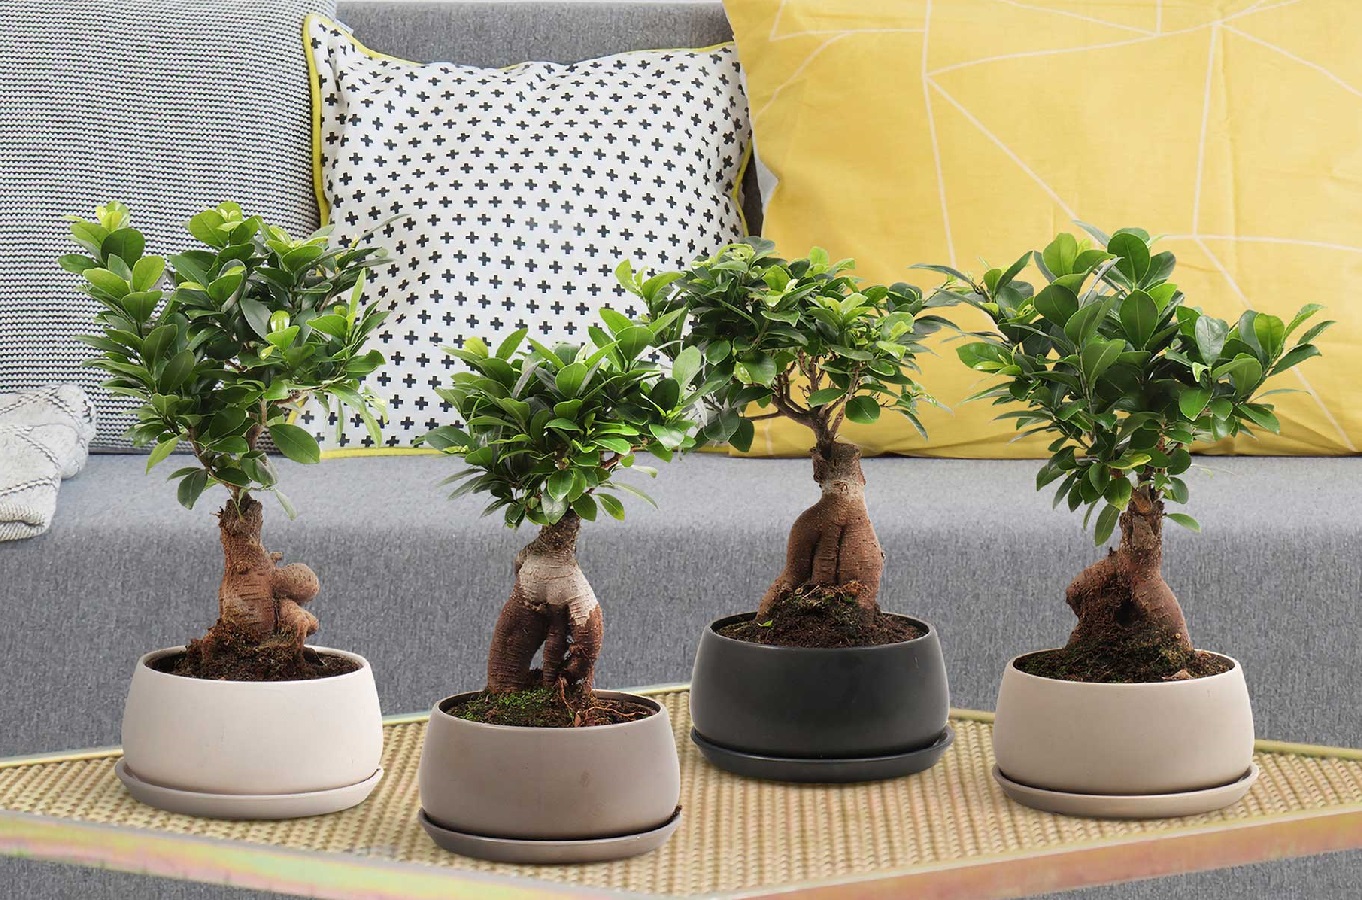 How to Care for a Bonsai Tree - Bonsai Tree Types, Price and Care